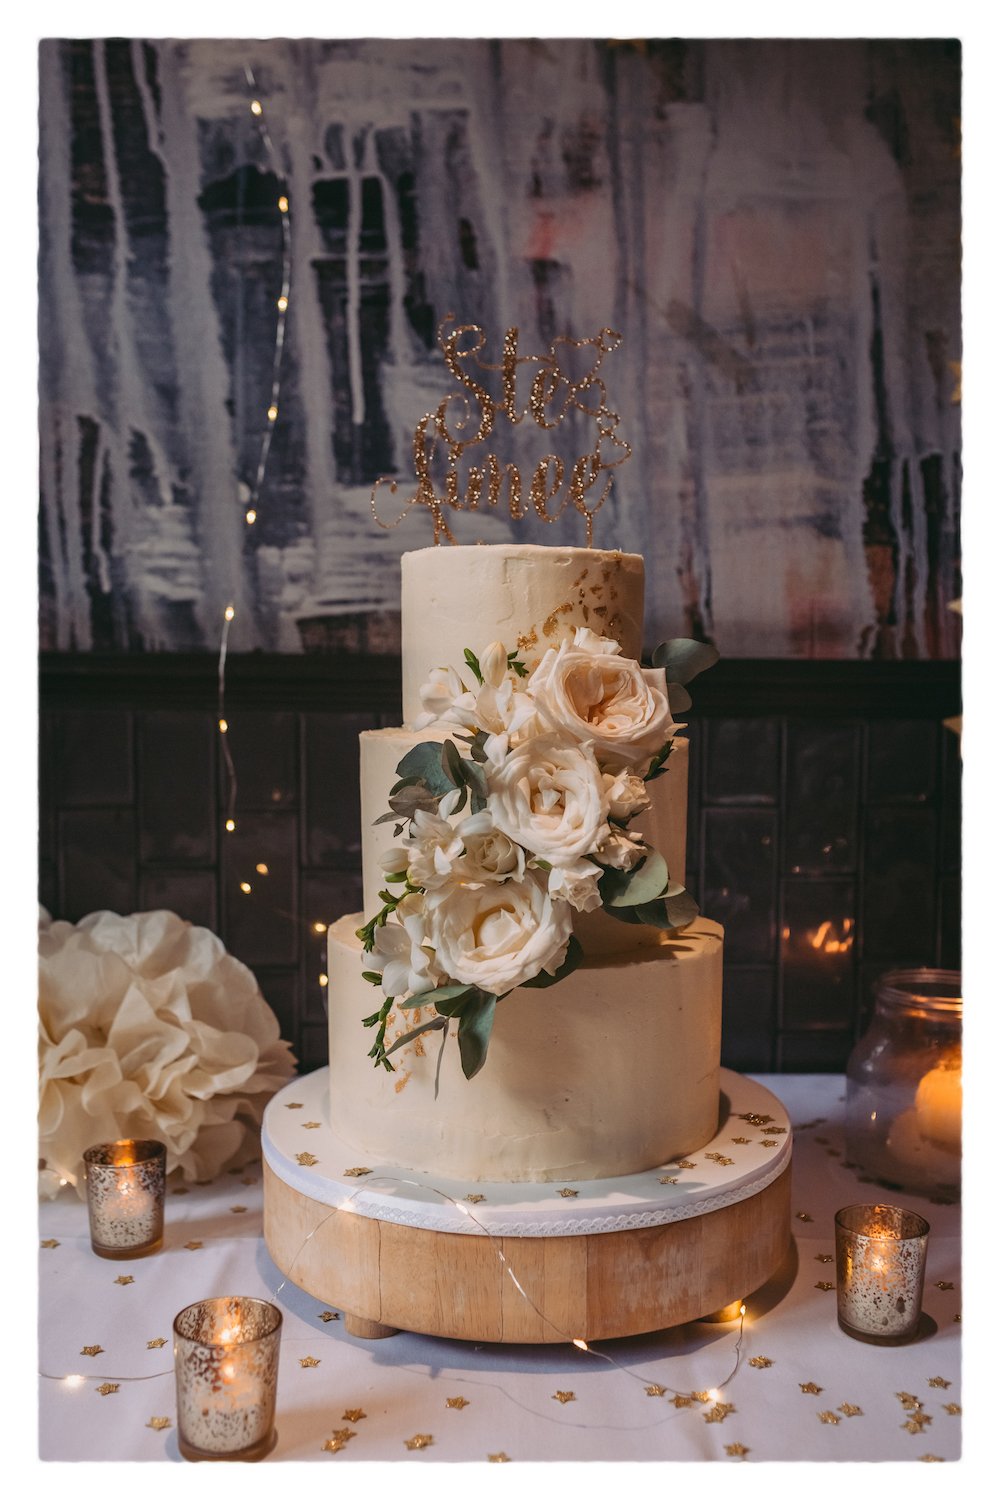 Buttercream wedding cake with gold leaf